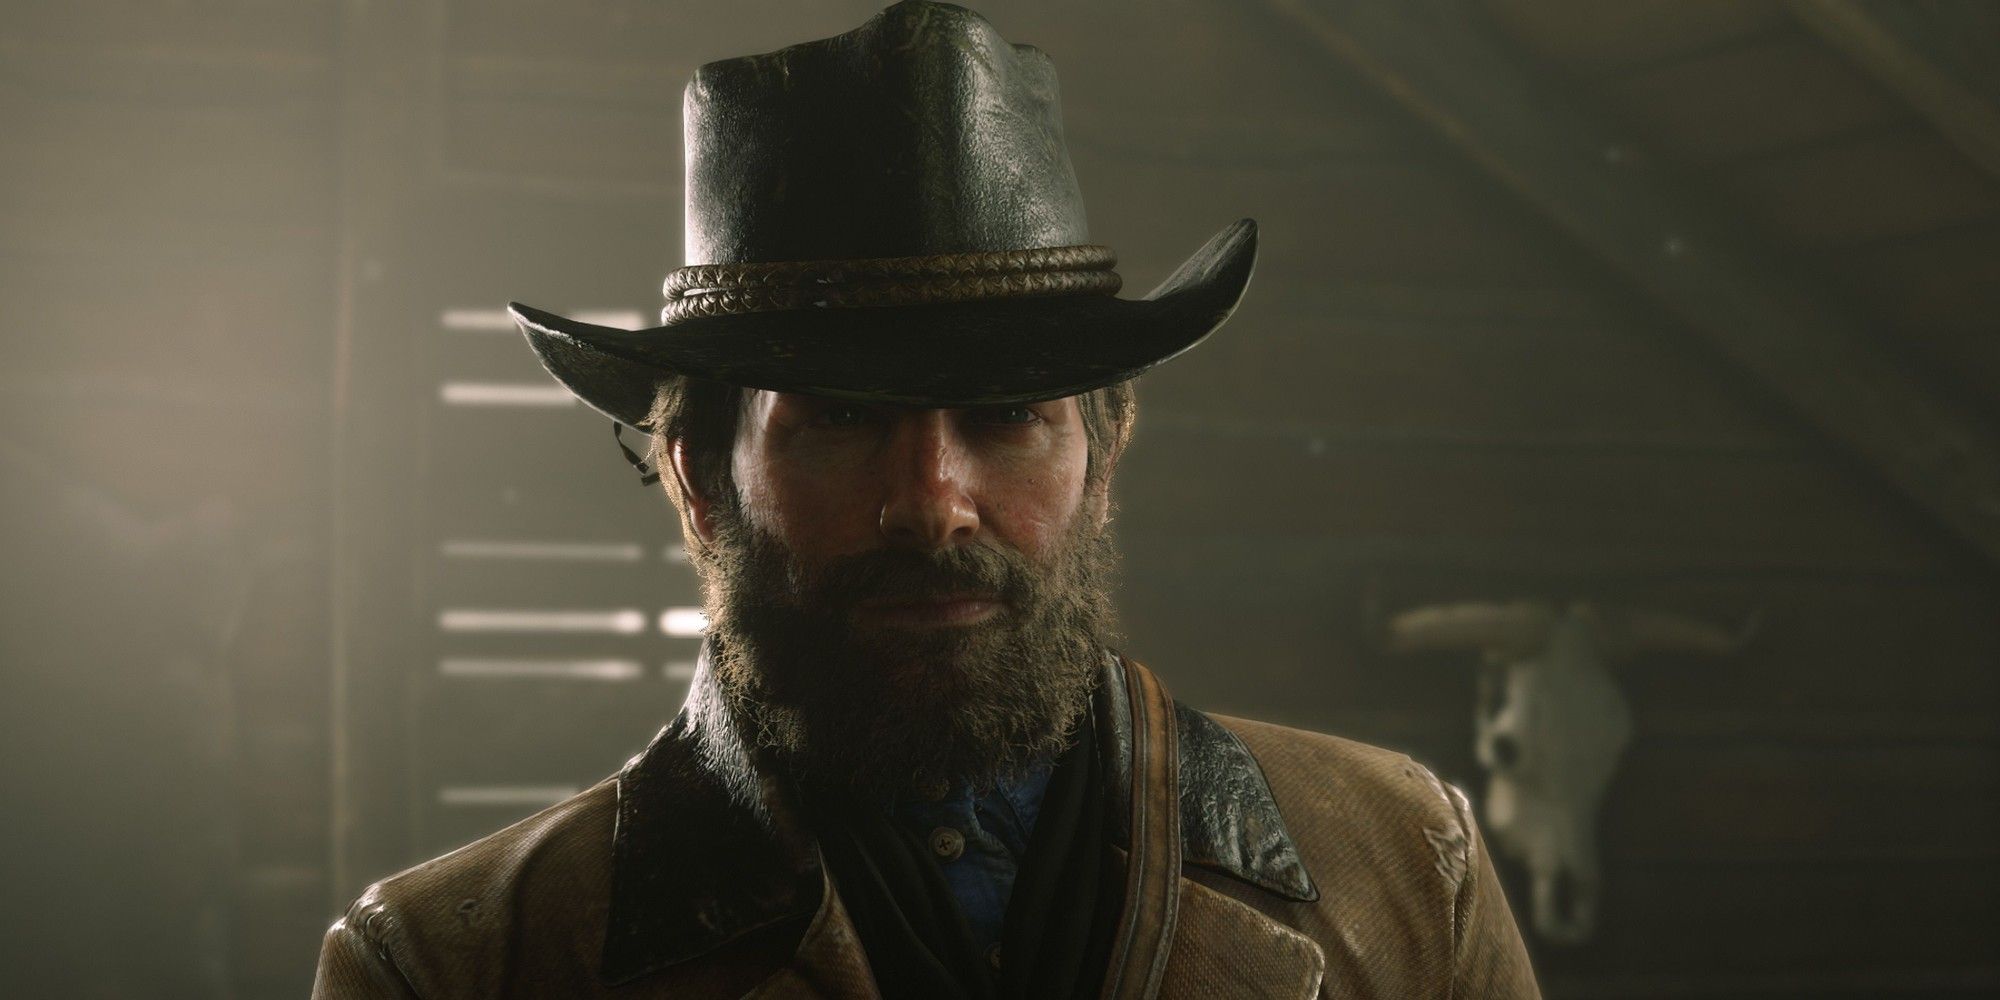 RDR2: Much Can Do Before Arthur Gets TB